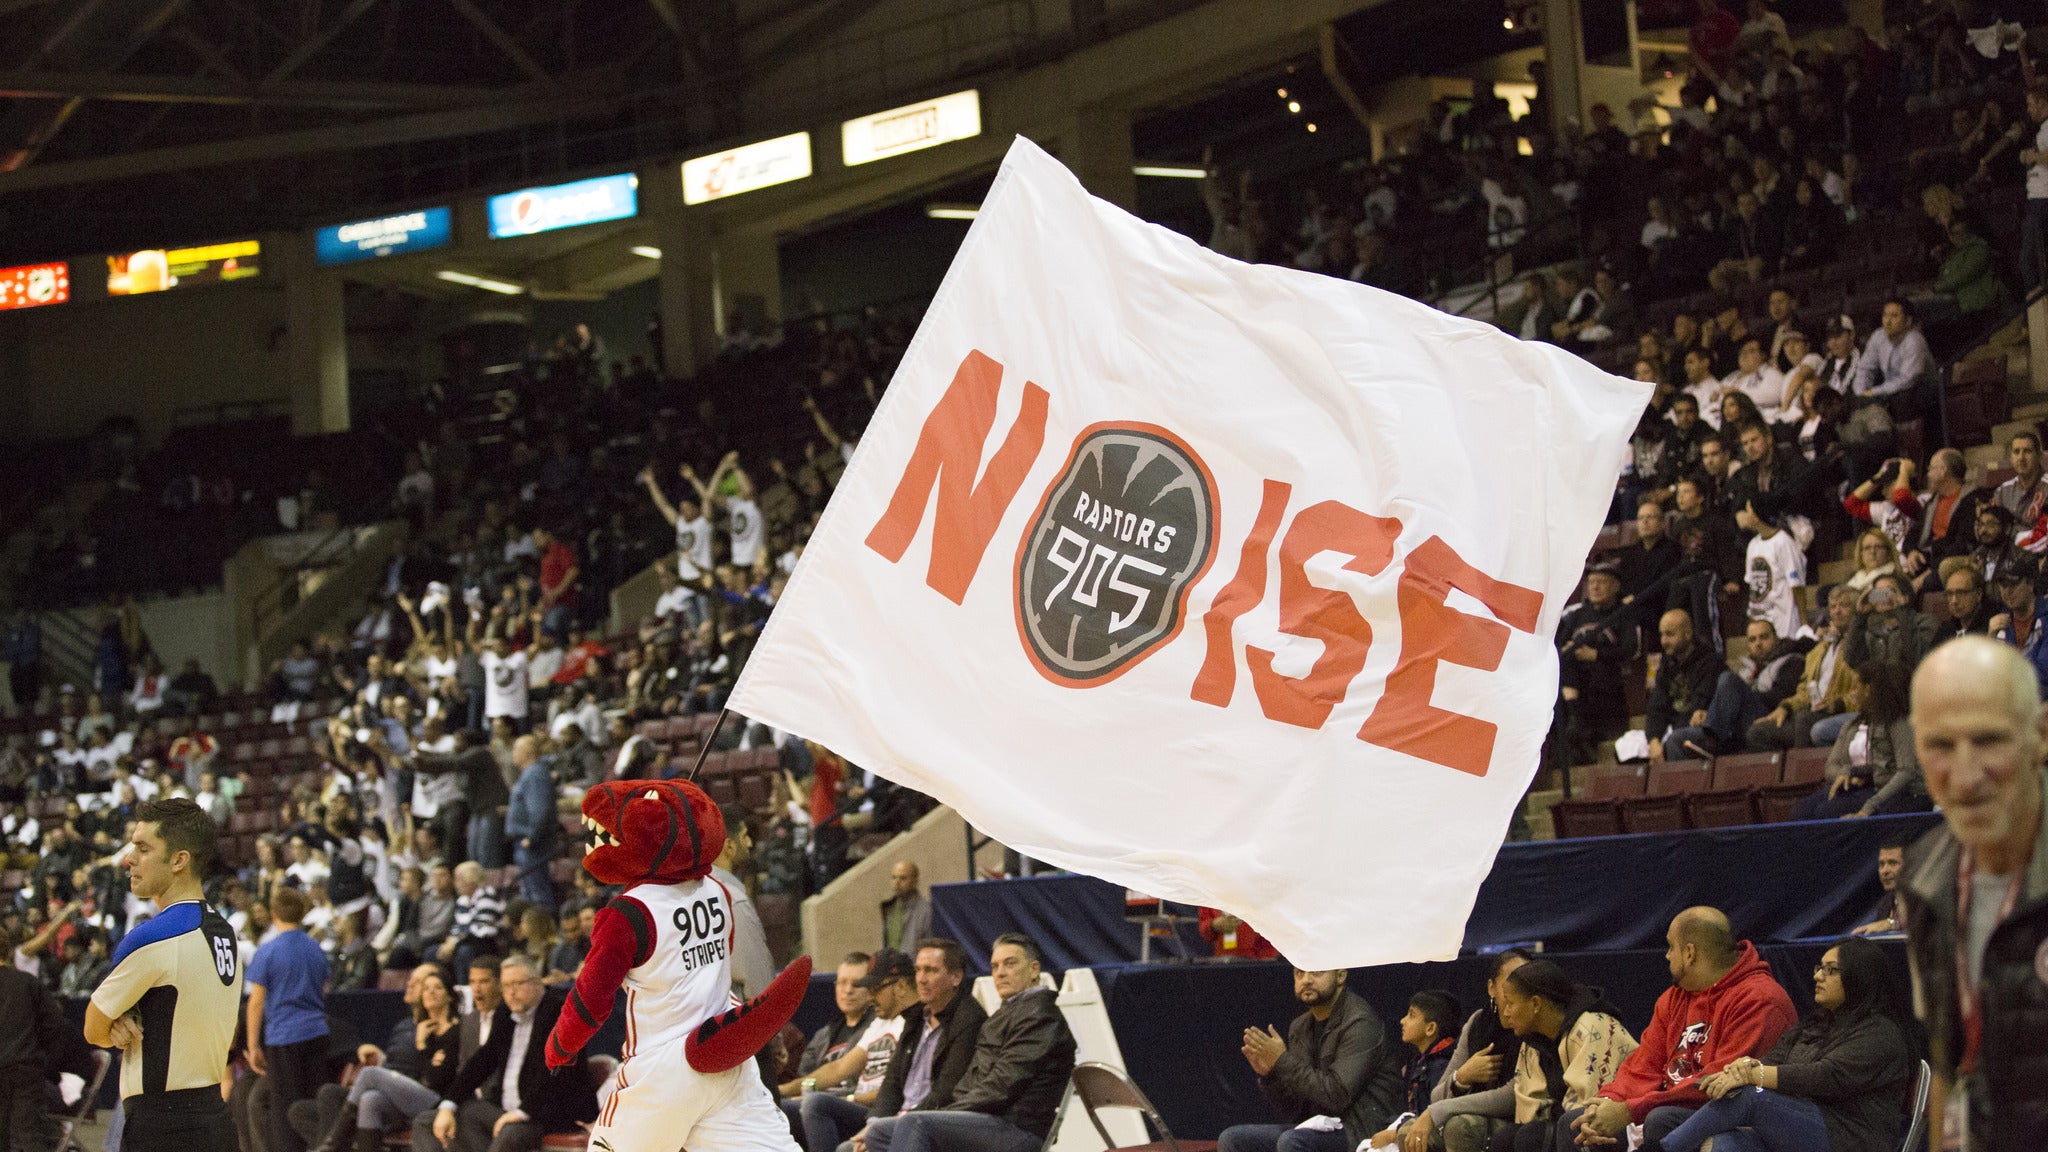 Raptors 905 Playoffs - Round 3 Home Game 1 in Mississauga promo photo for Flex Packs presale offer code